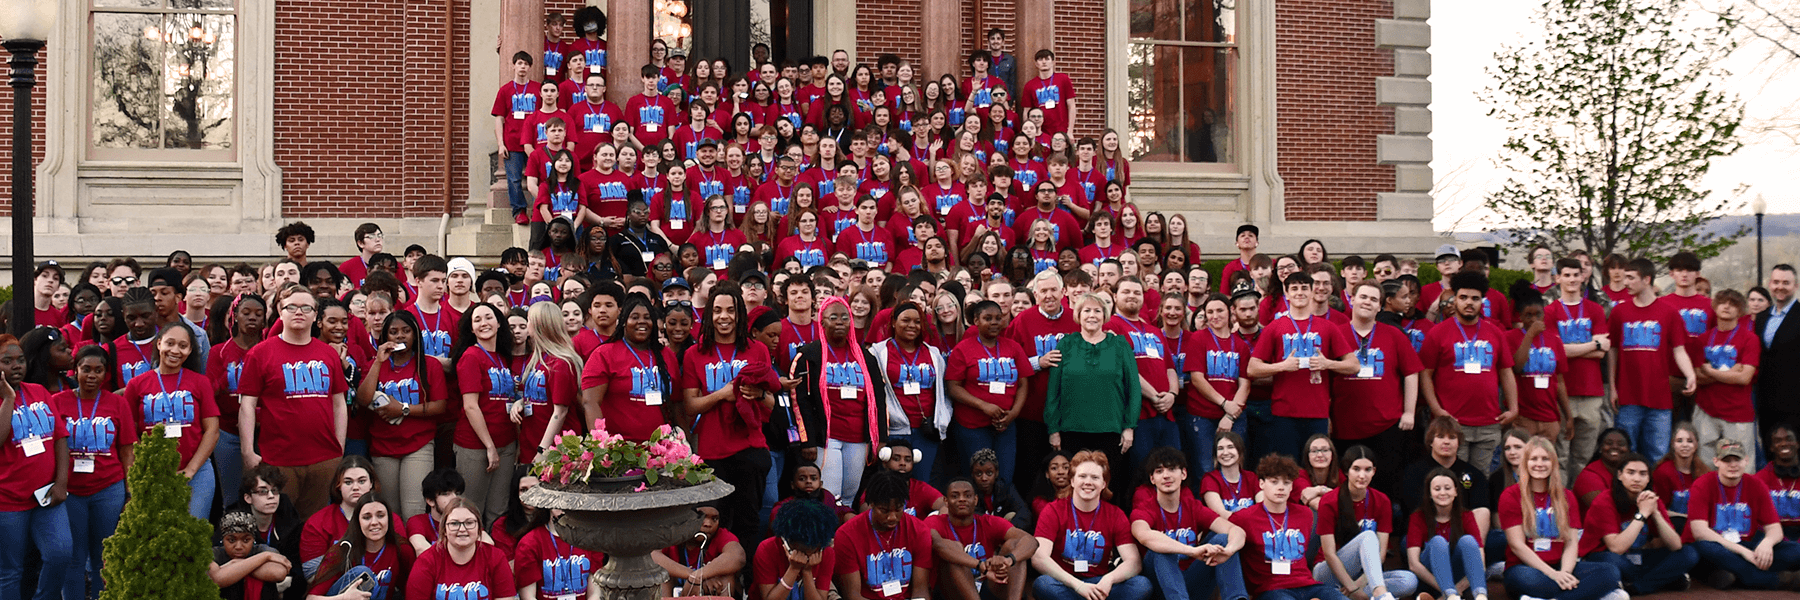 Jobs Across America (JAG) students with Missouri Governor and First Lady Parson in front of the Missouri Governor's Mansion.